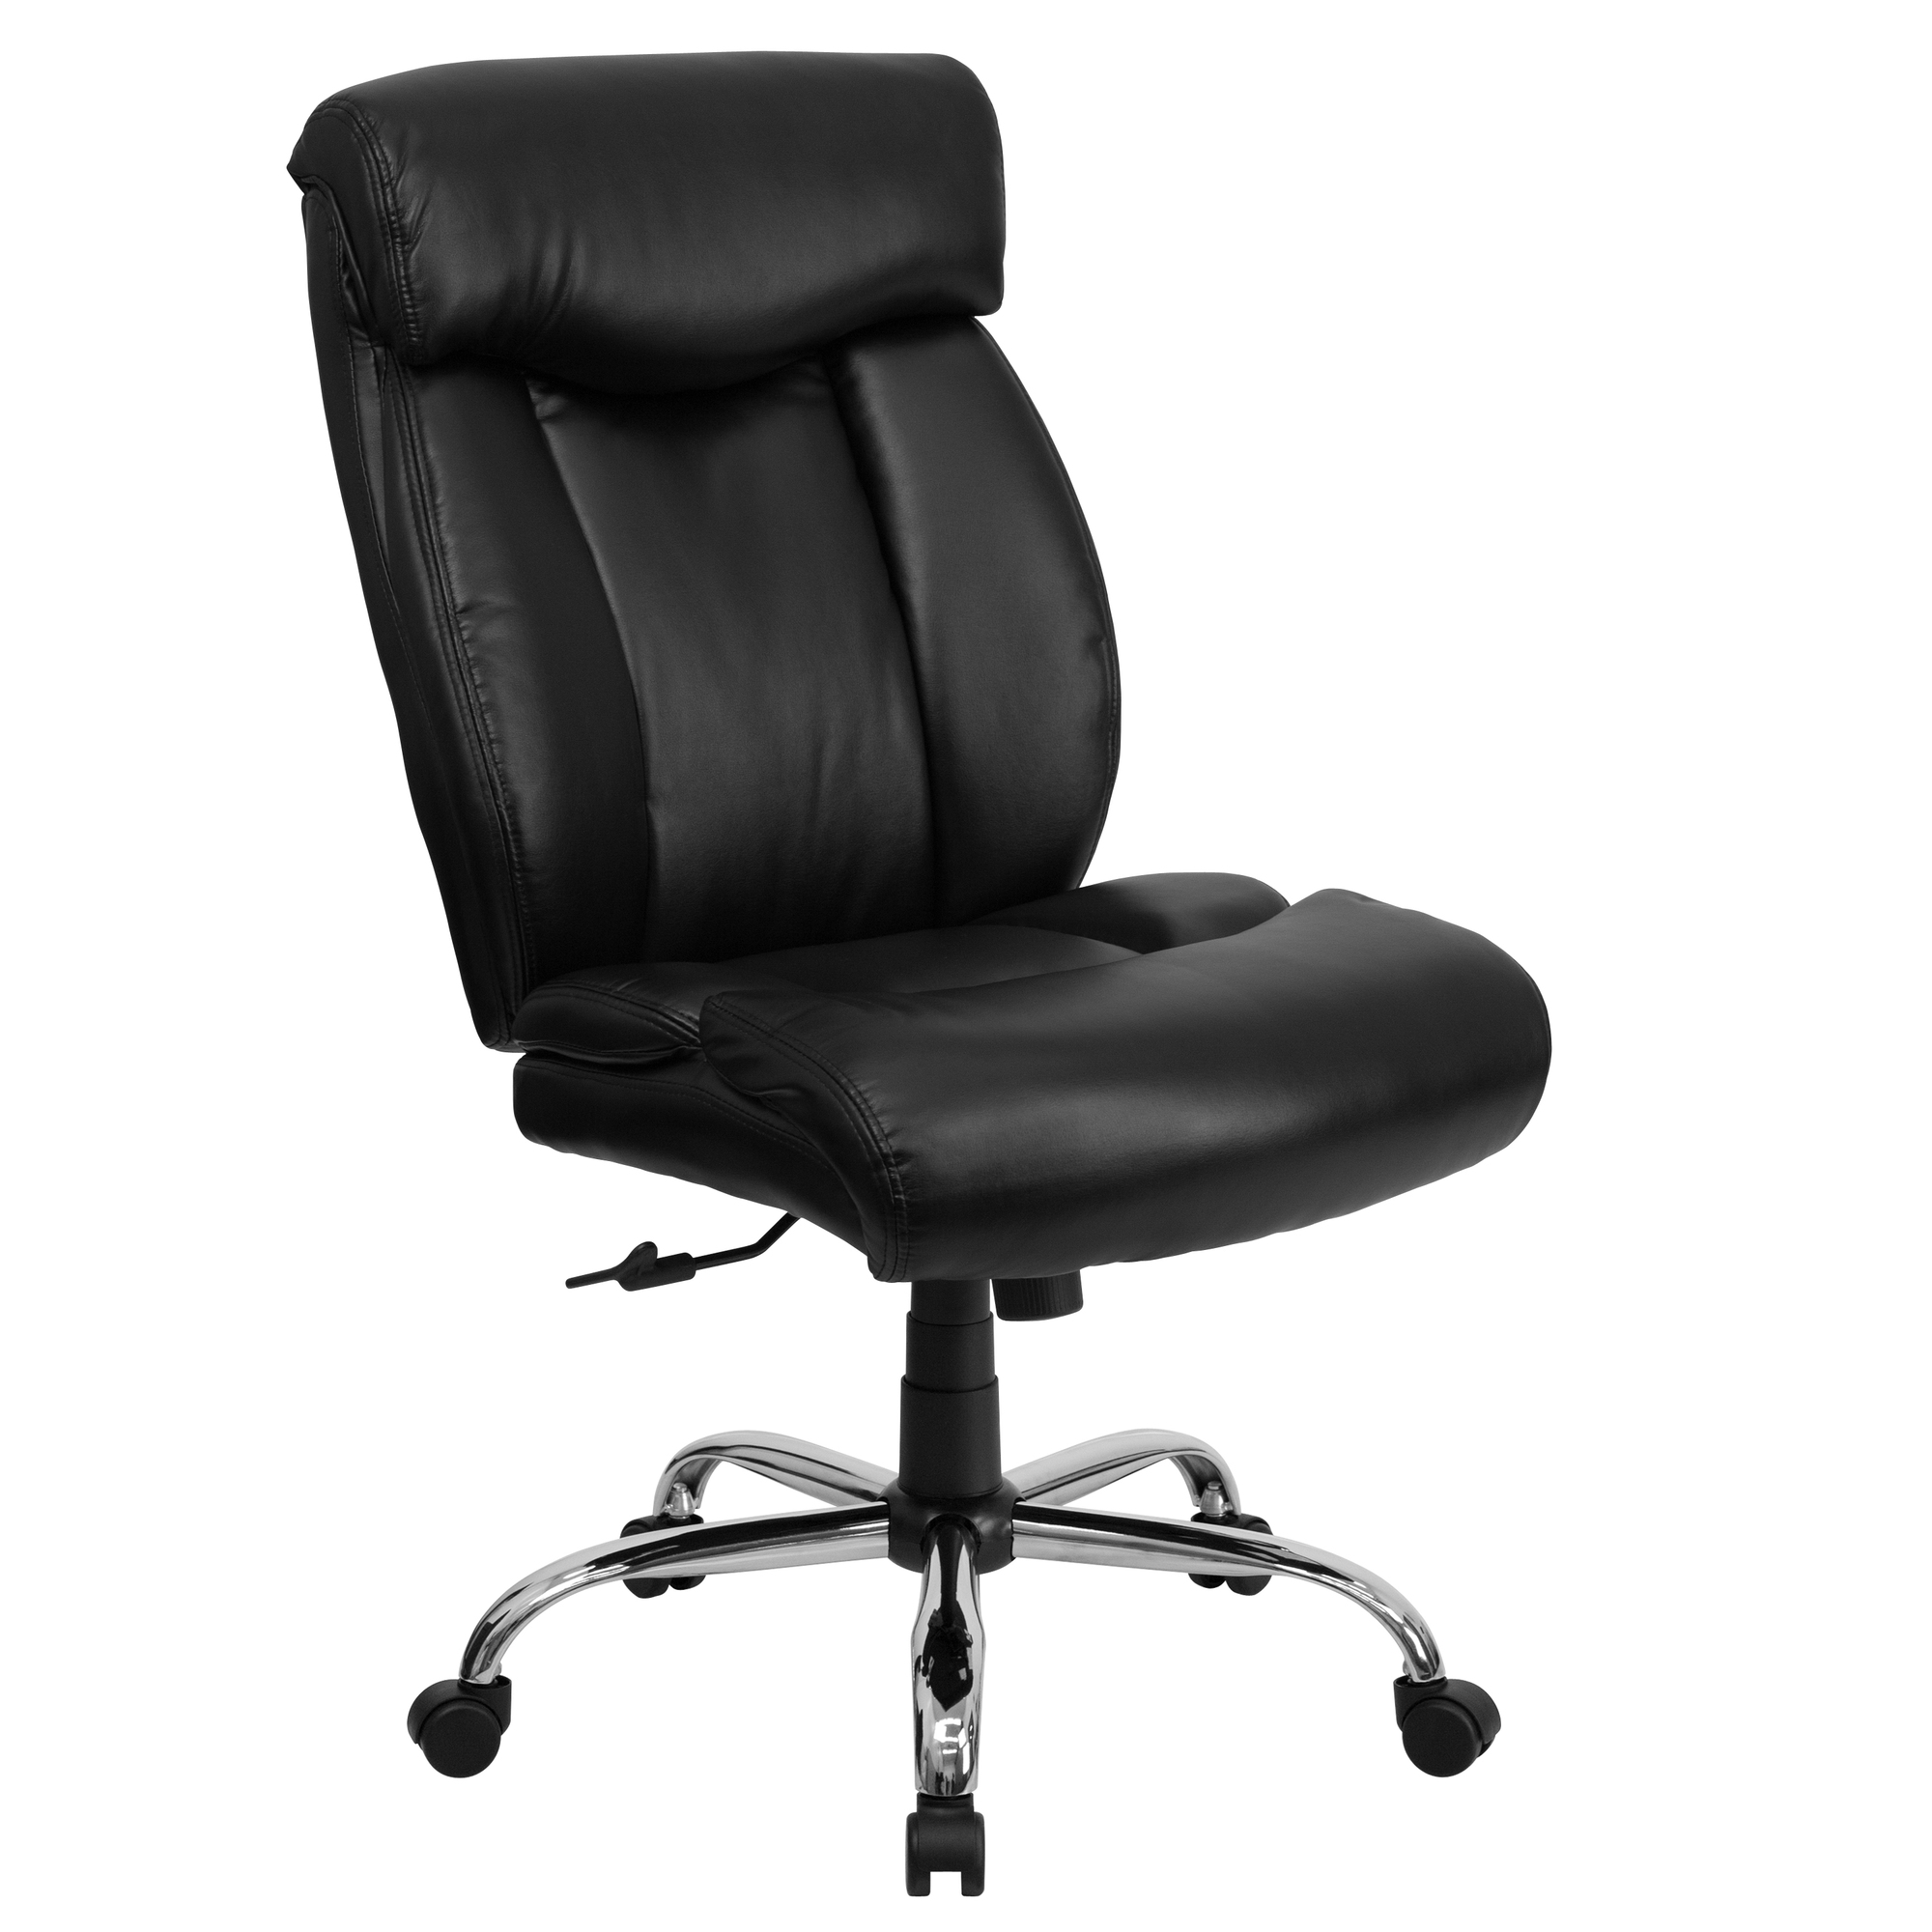 Big Tall 400 lb. Rated Black LeatherSoft Chair, Primary Color Black, Included (qty.) 1, Model - Flash Furniture GO1235BKLEA